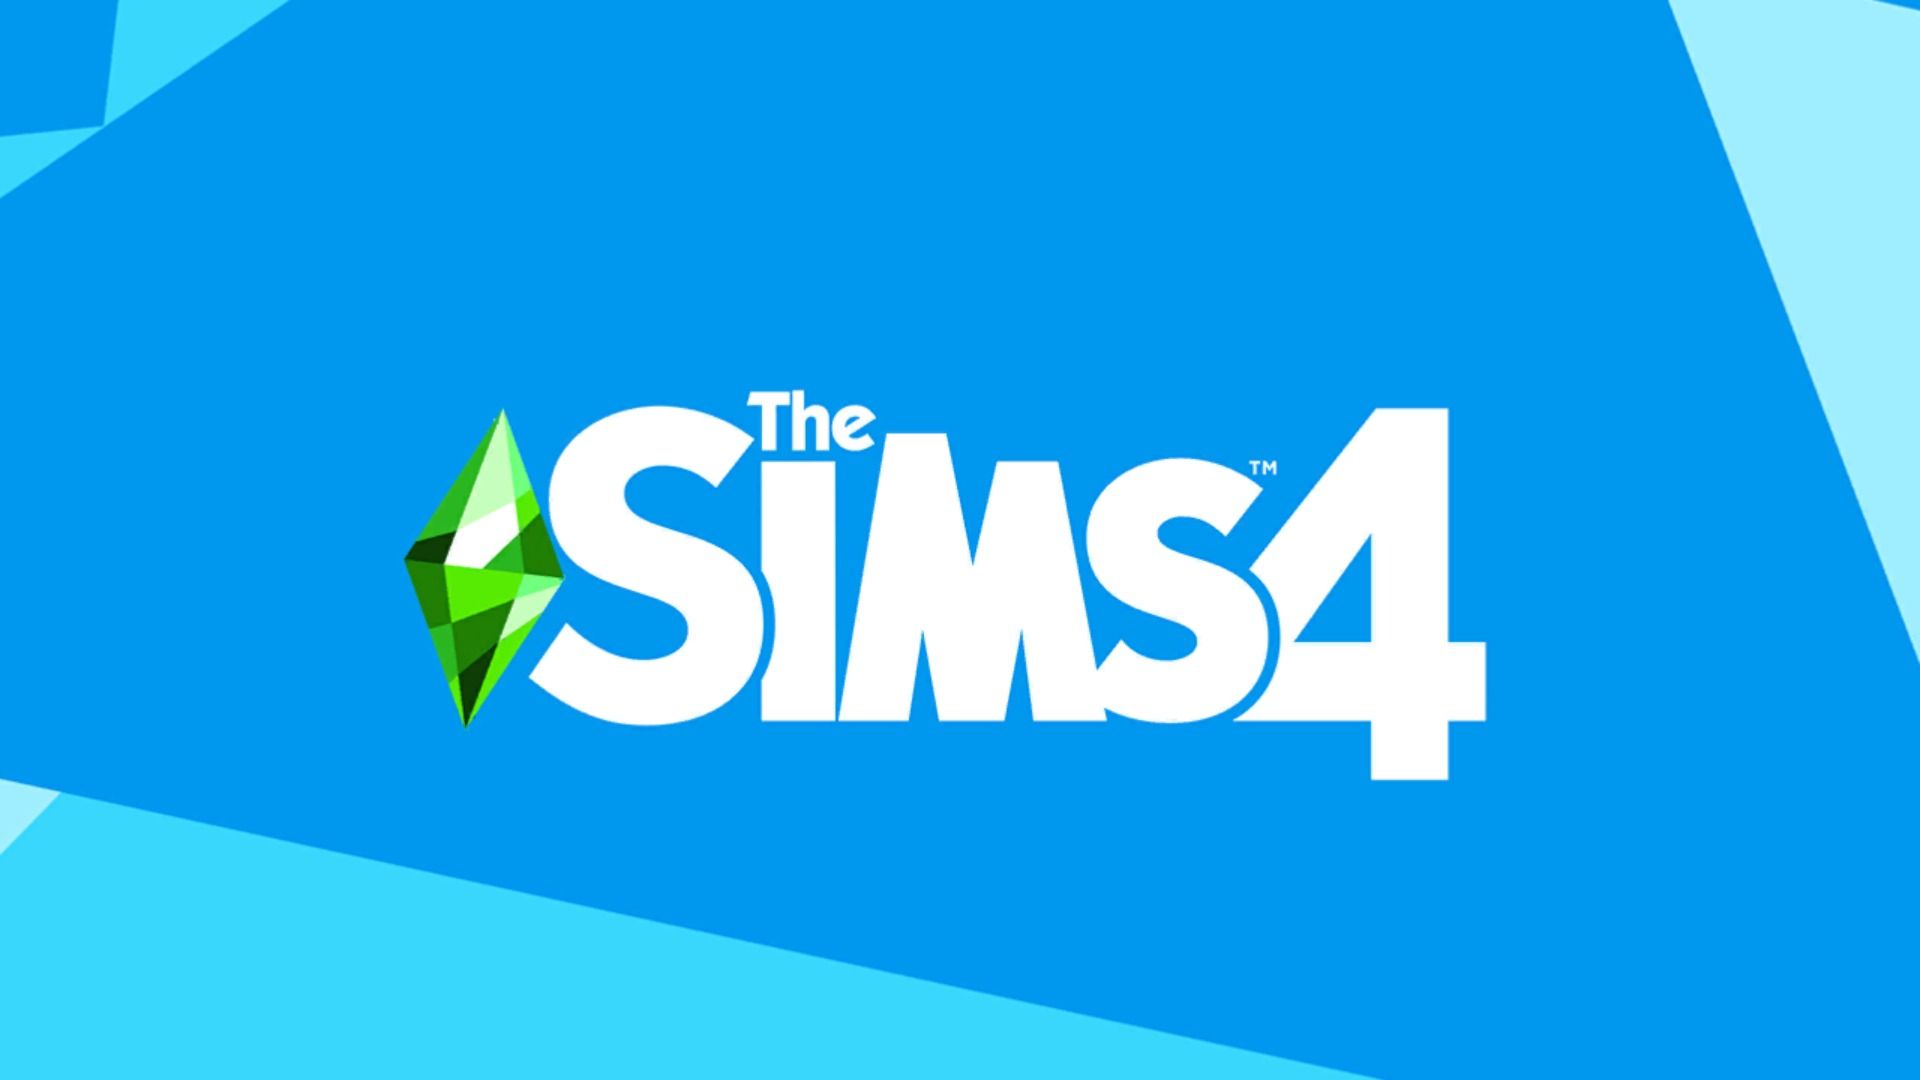 sims 4 mac requirements